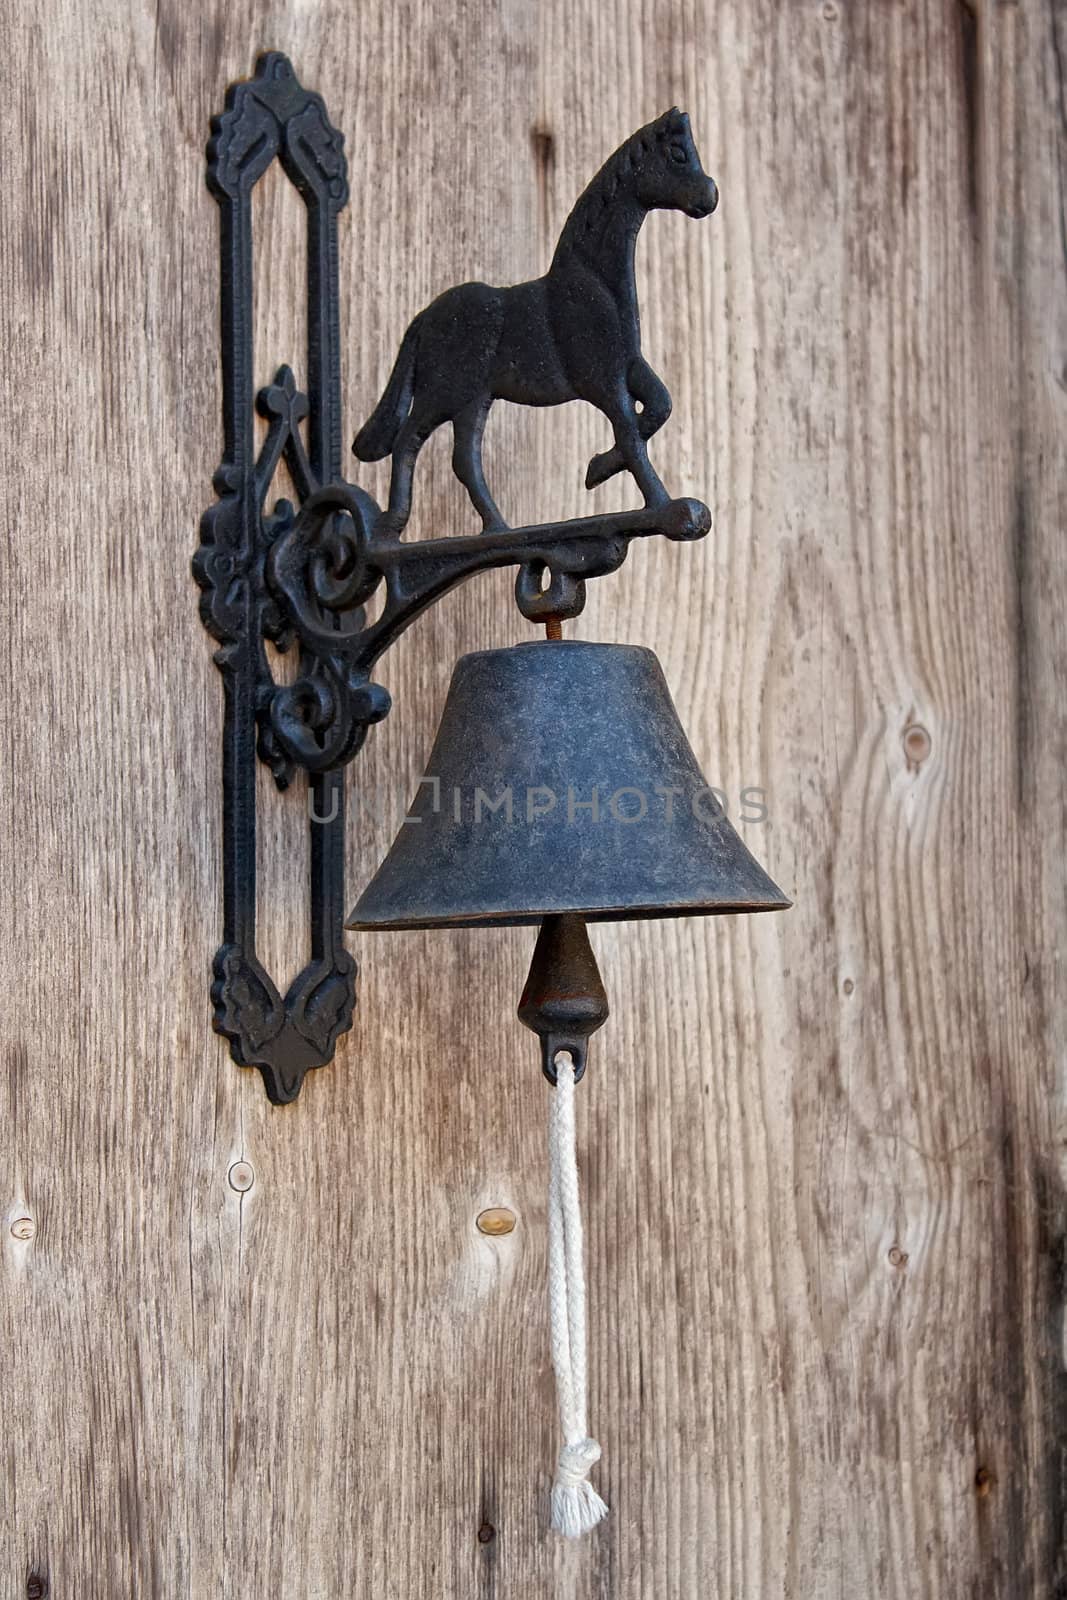 Classic Door Bell with silhouette of horse